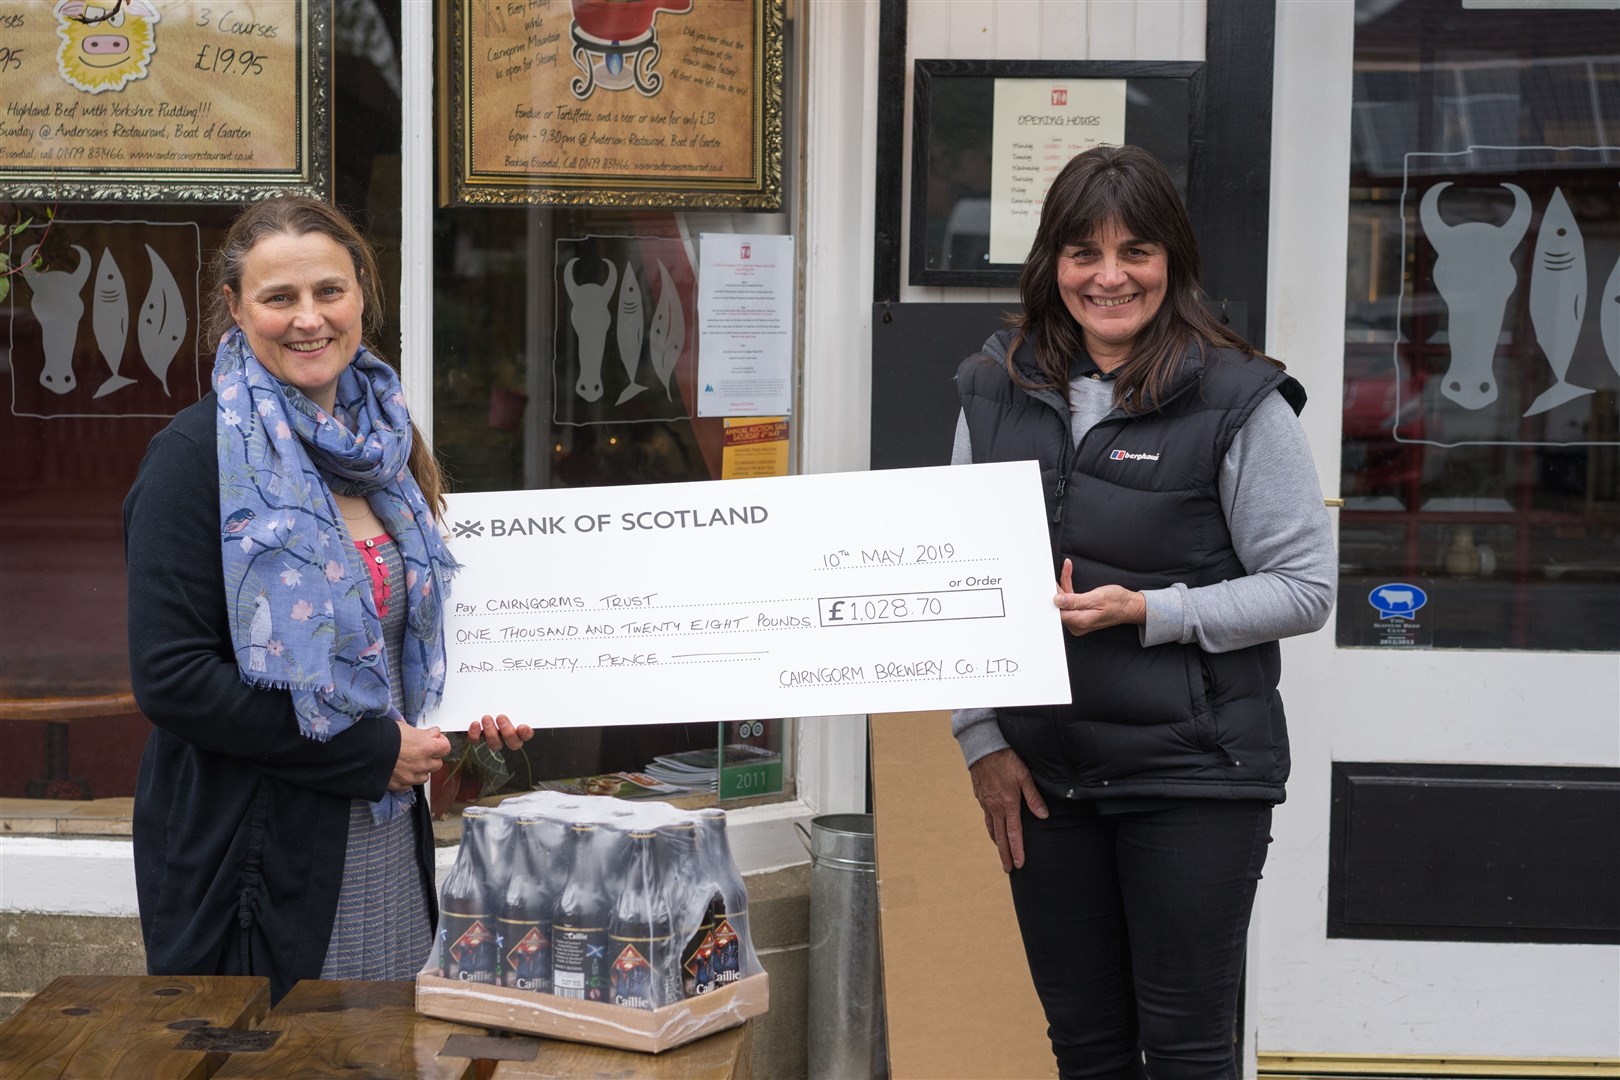 The cheque presentation from Cairngorms Brewery to the trust.